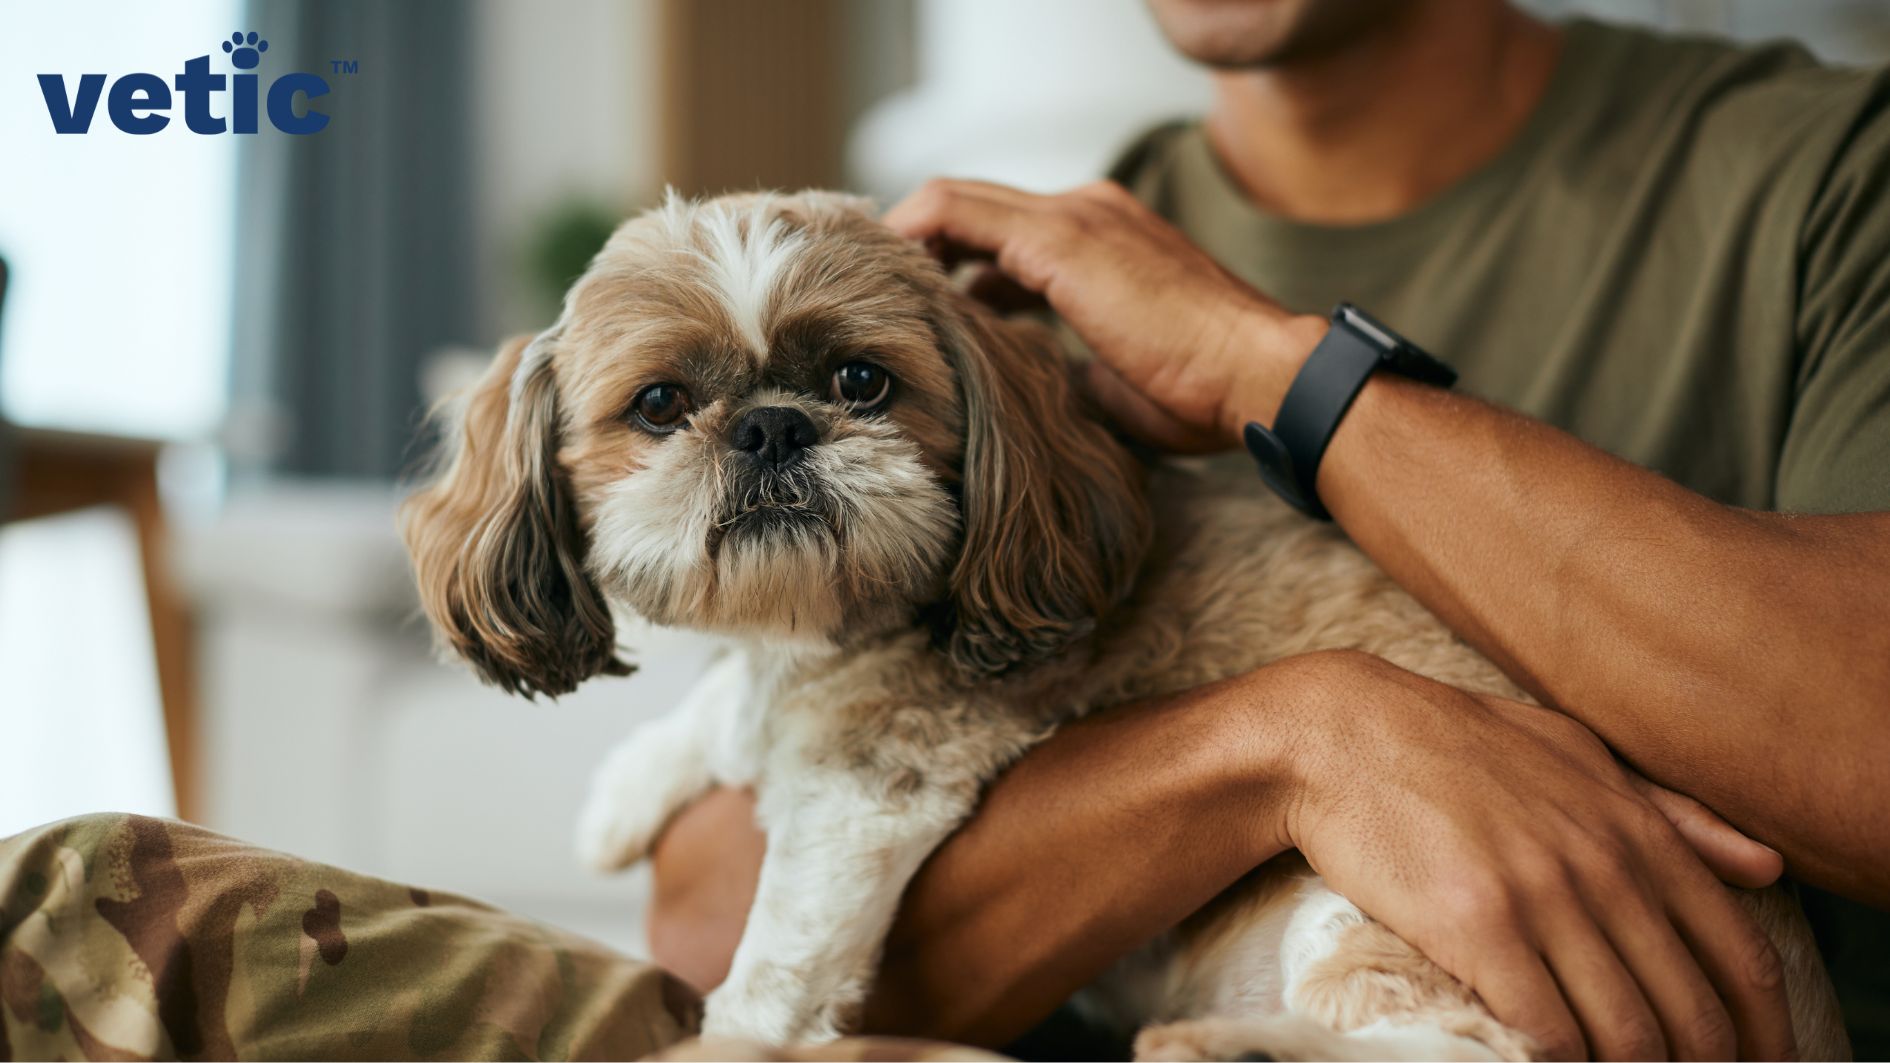 Shih Tzu breed adult sitting on a man's lap looking back at the camera. He has dark brown fur around his eyes and on his ears.